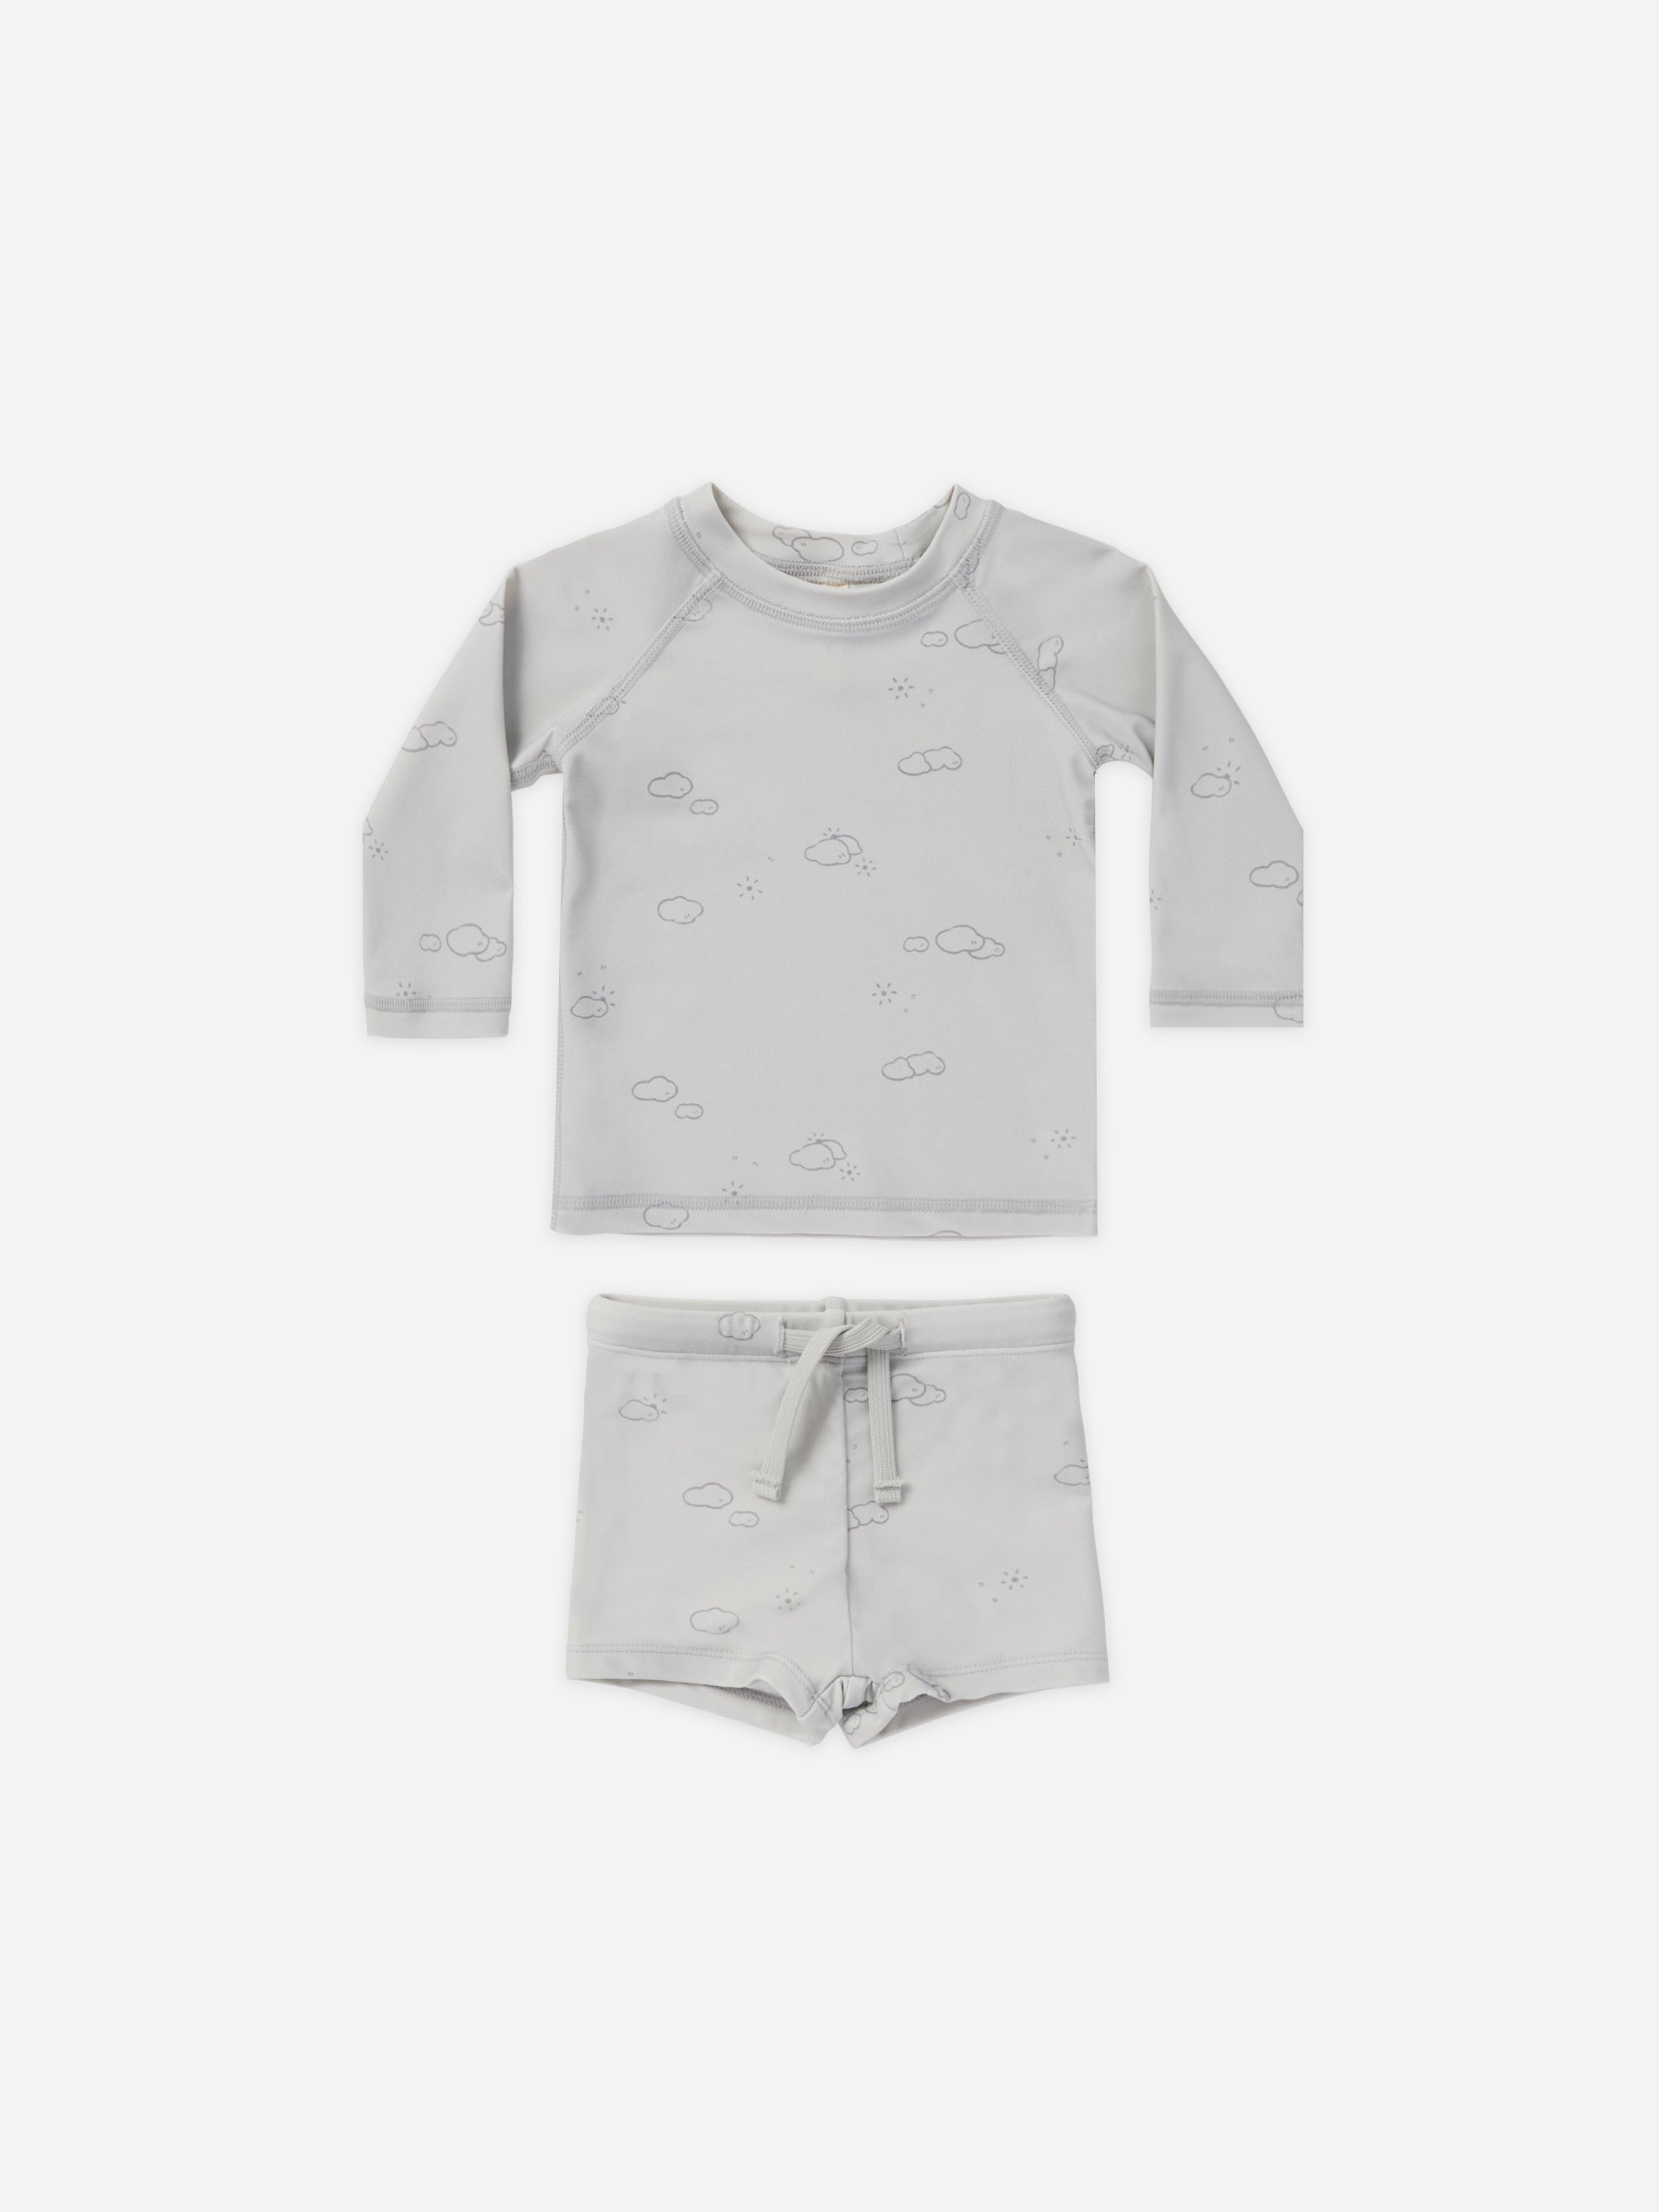 Finn Rashguard + Short Set || Sunny Day - Rylee + Cru | Kids Clothes | Trendy Baby Clothes | Modern Infant Outfits |